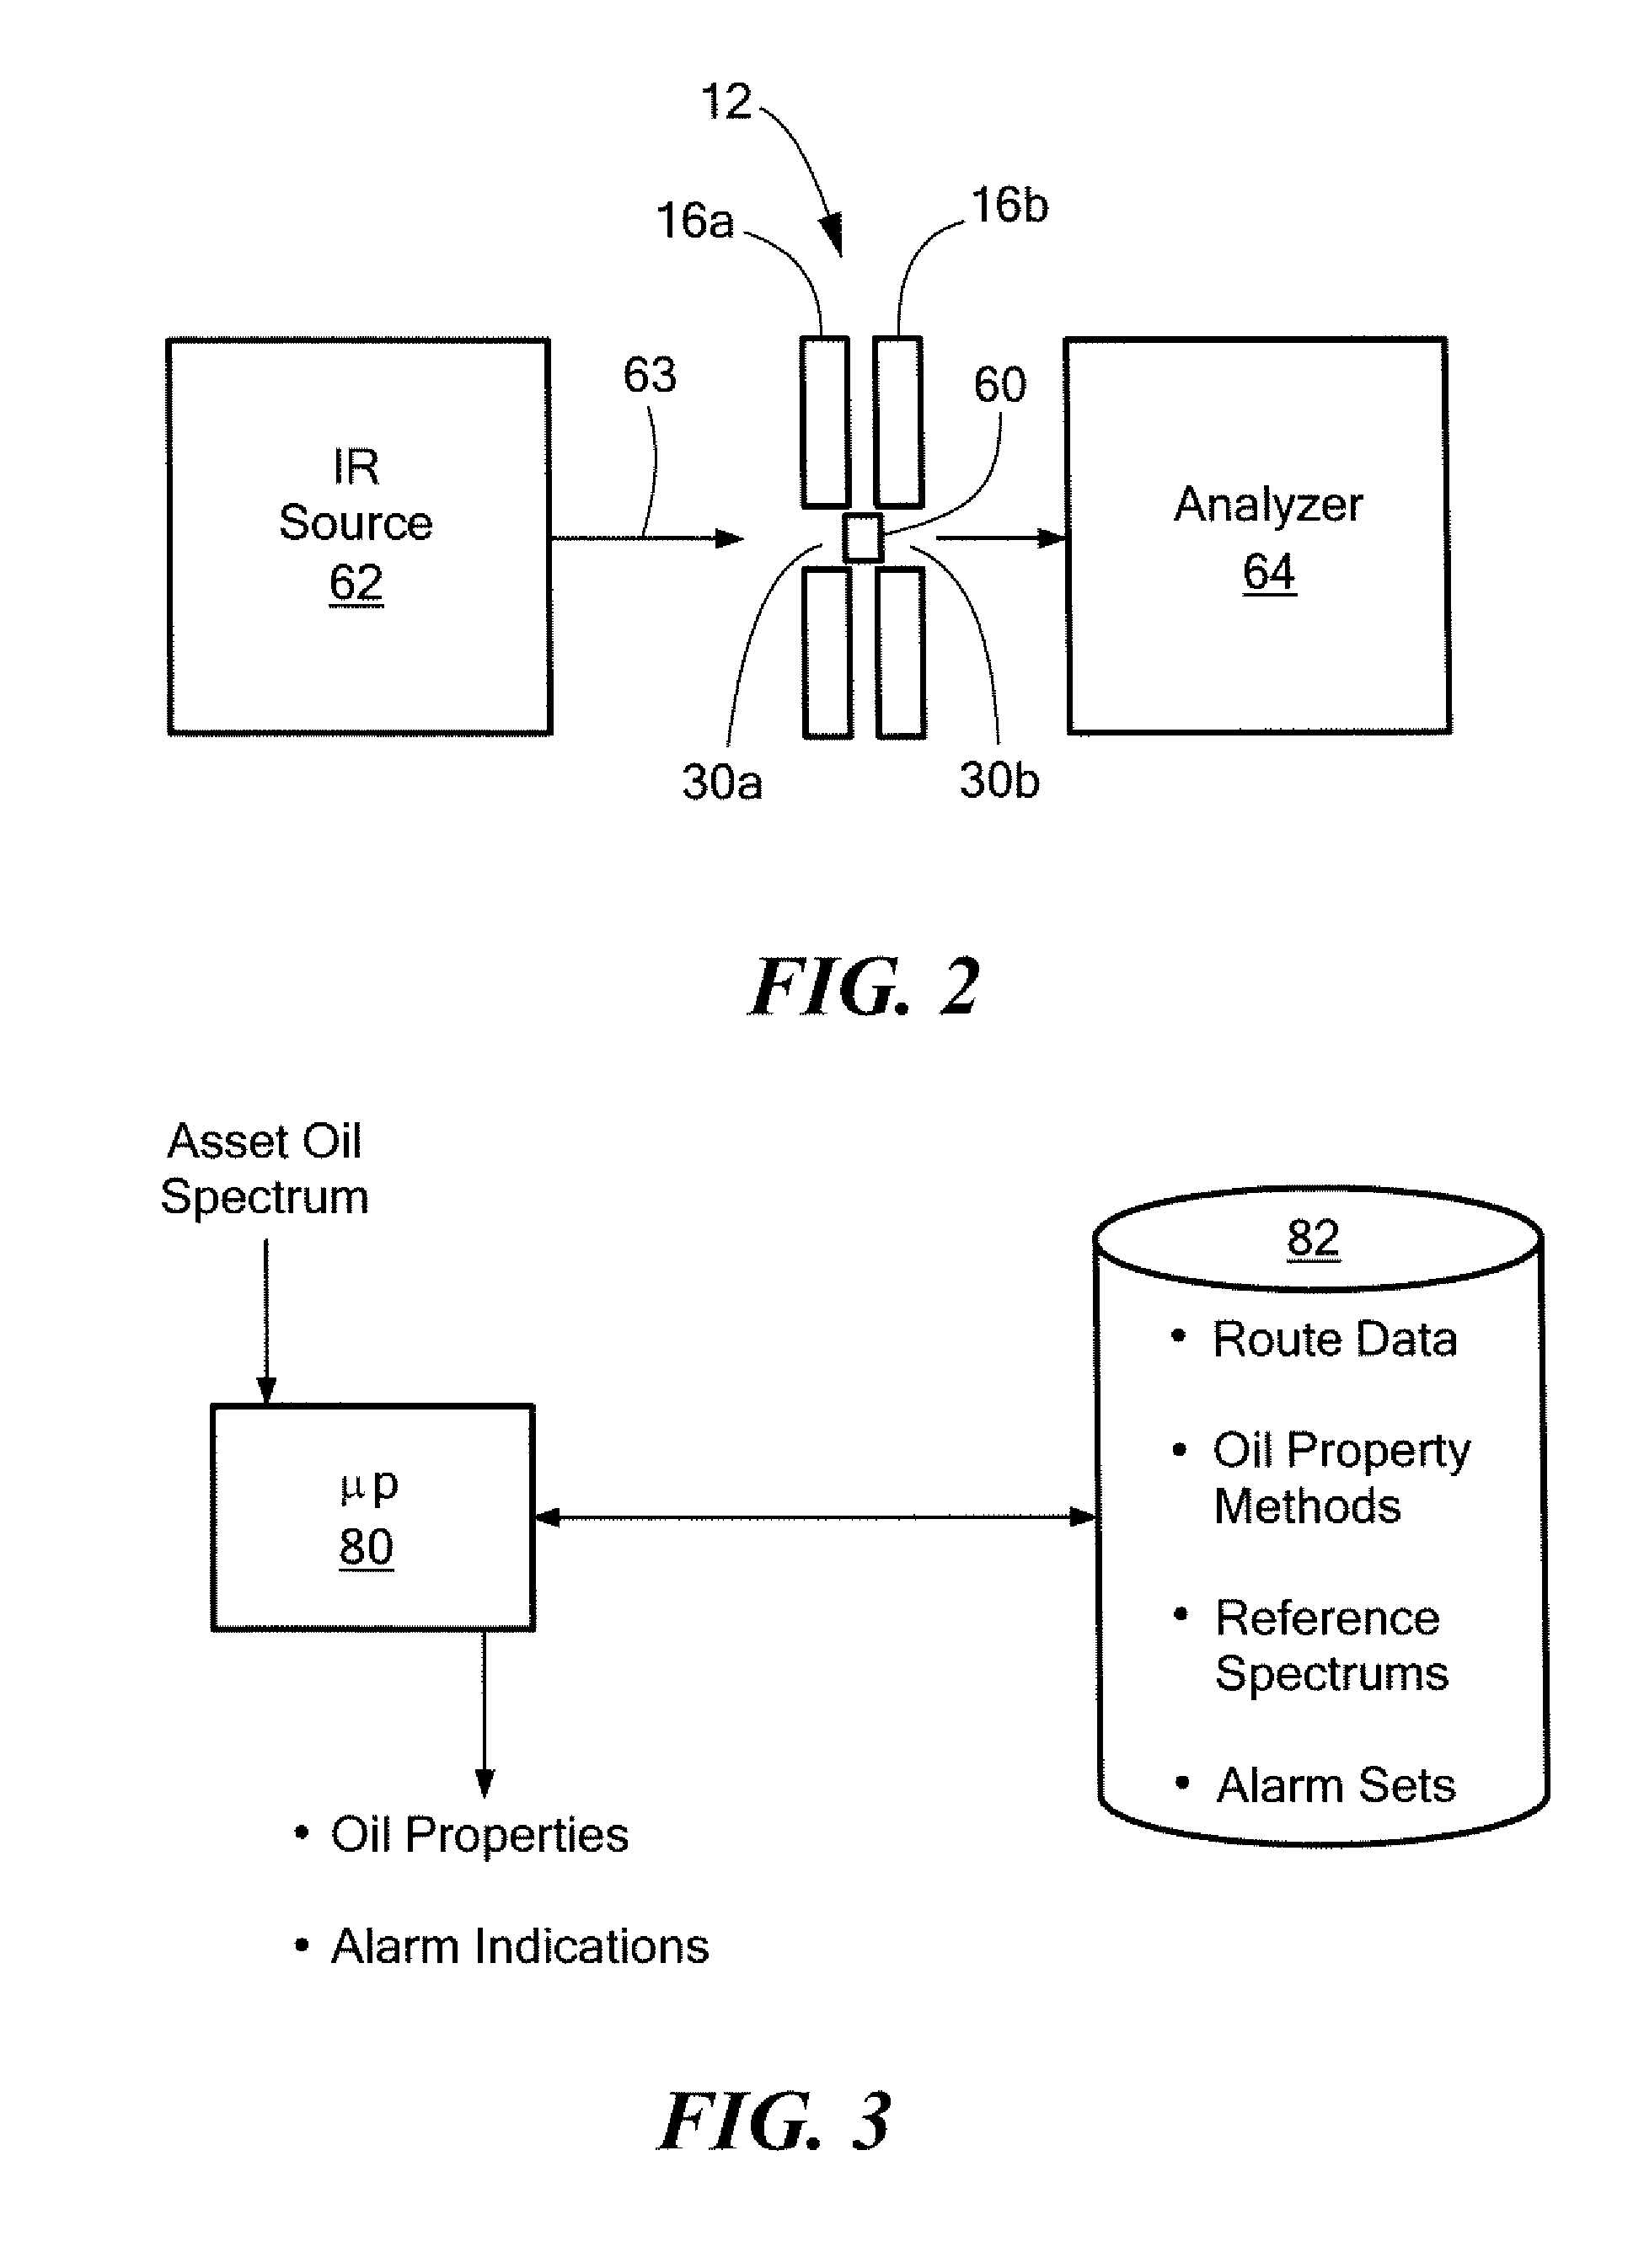 Route-based substance analysis system and method